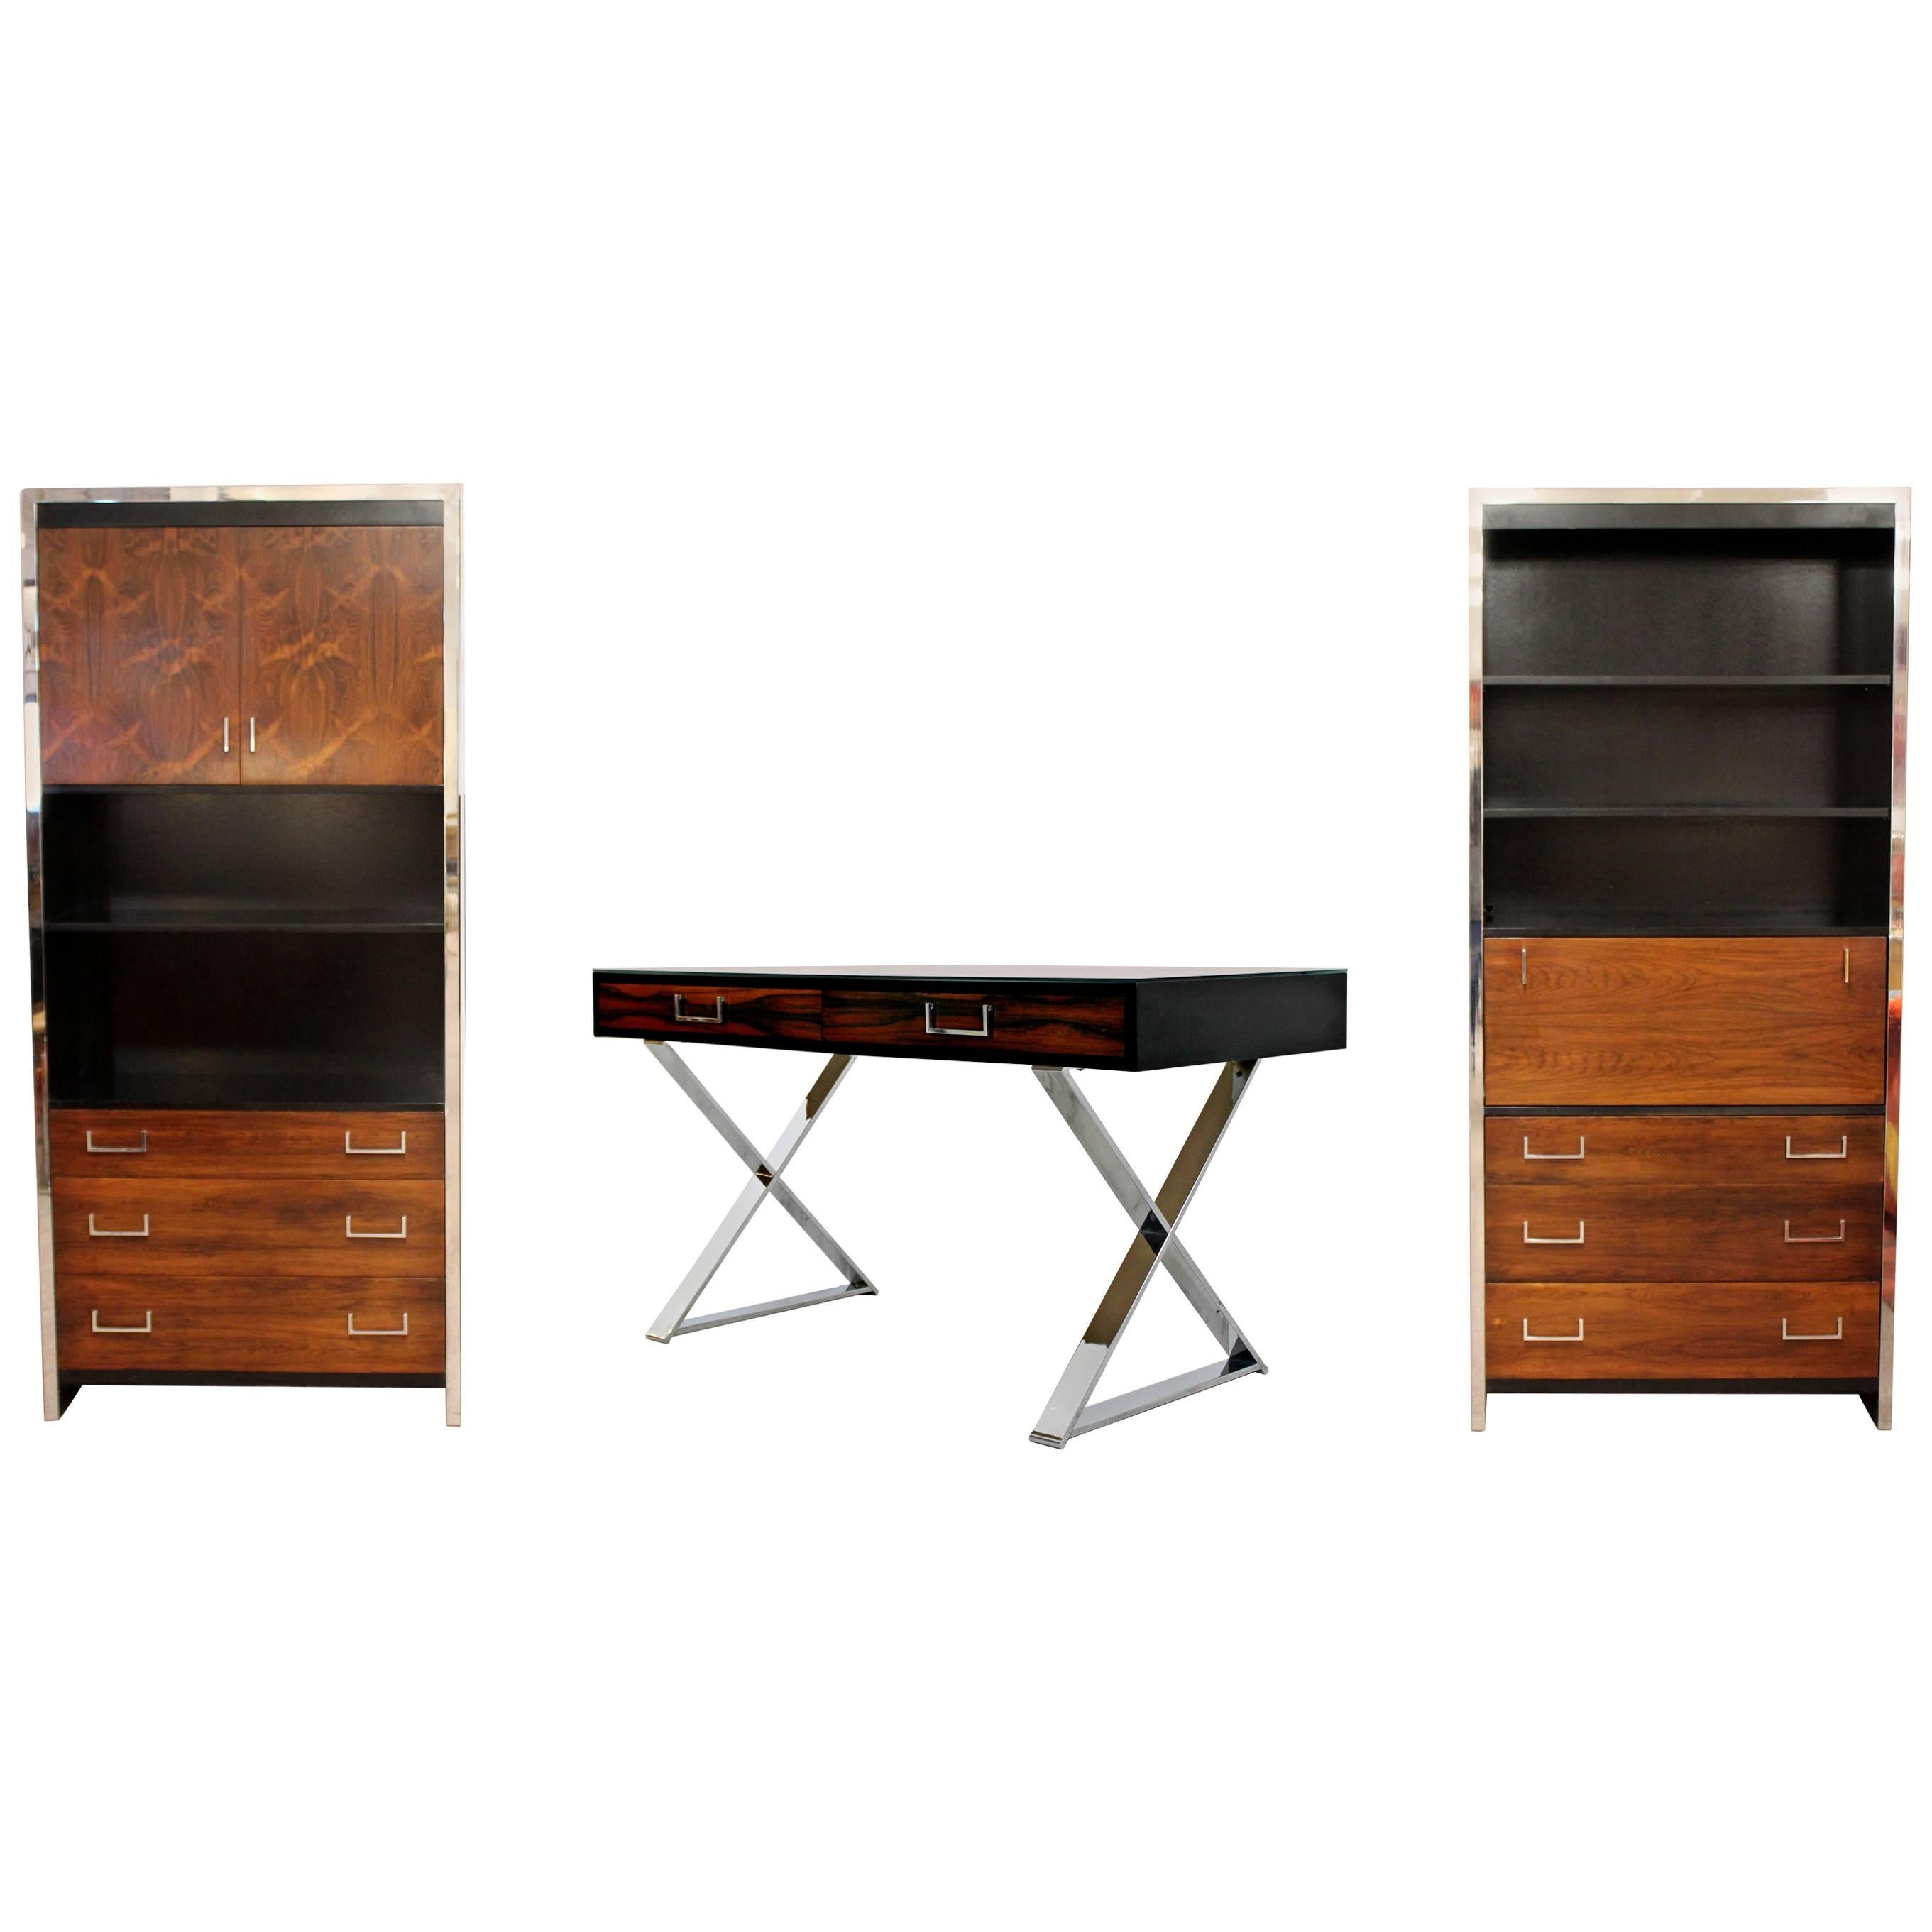 Mid-Century Modern Baughman Pair of Rosewood Cabinets and Campaign X Desk Set